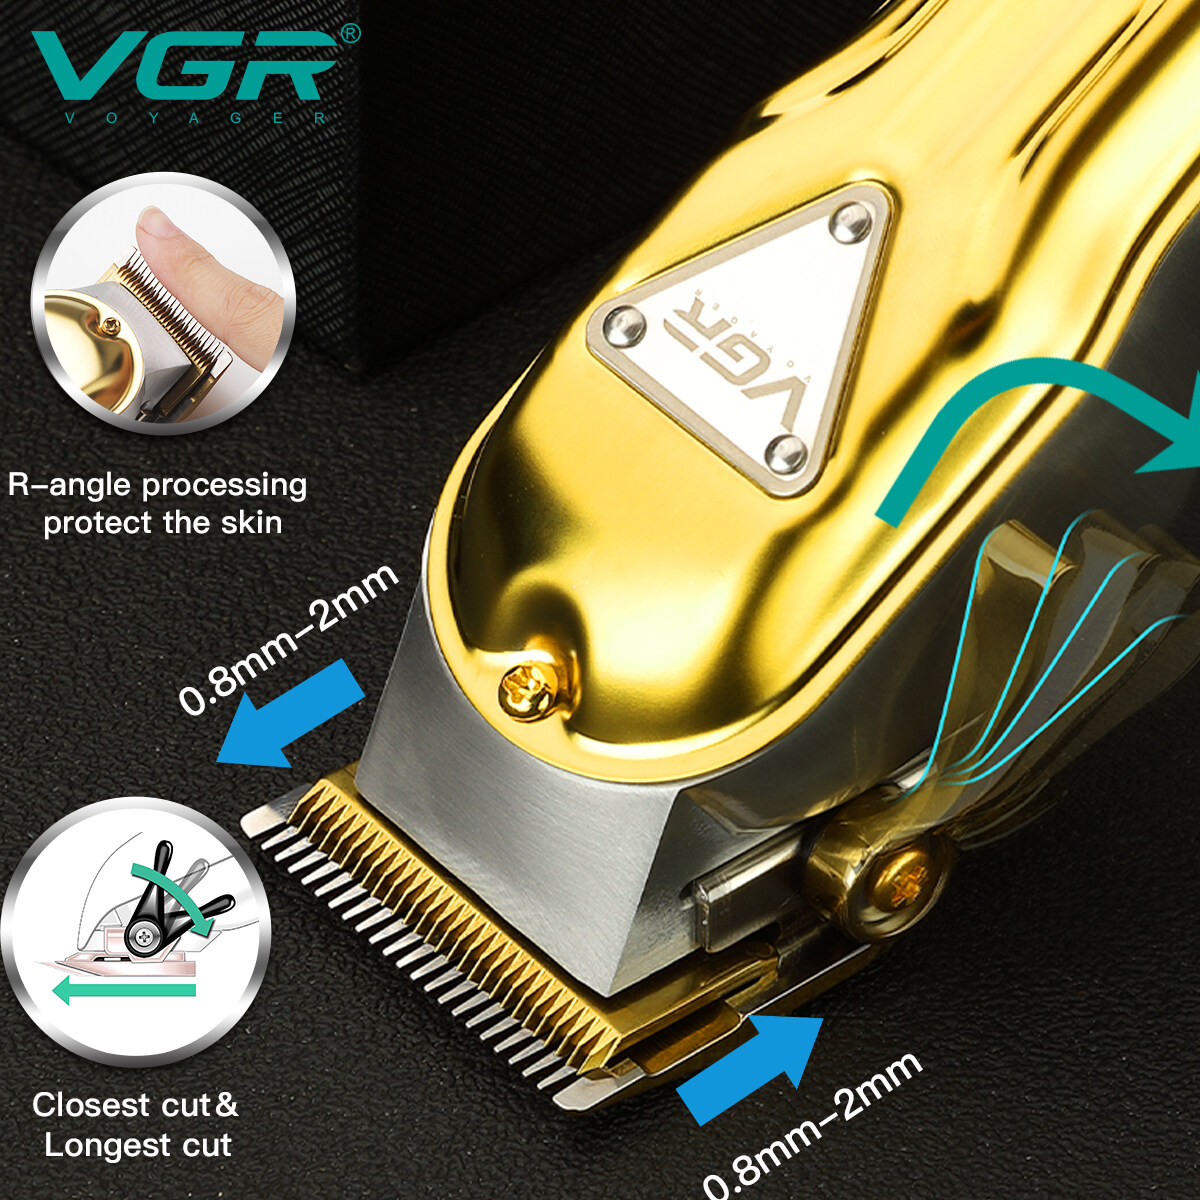 China Professional Rechargeable Hair Clipper Factory, Hair Clipper For Professional Barber, High End Hair Clippers, High Quality Clippers Barber, Wholesale Professional Adjustable Hair Clippers, Wholesale Professional Rechargeable Professional Hair Clipper